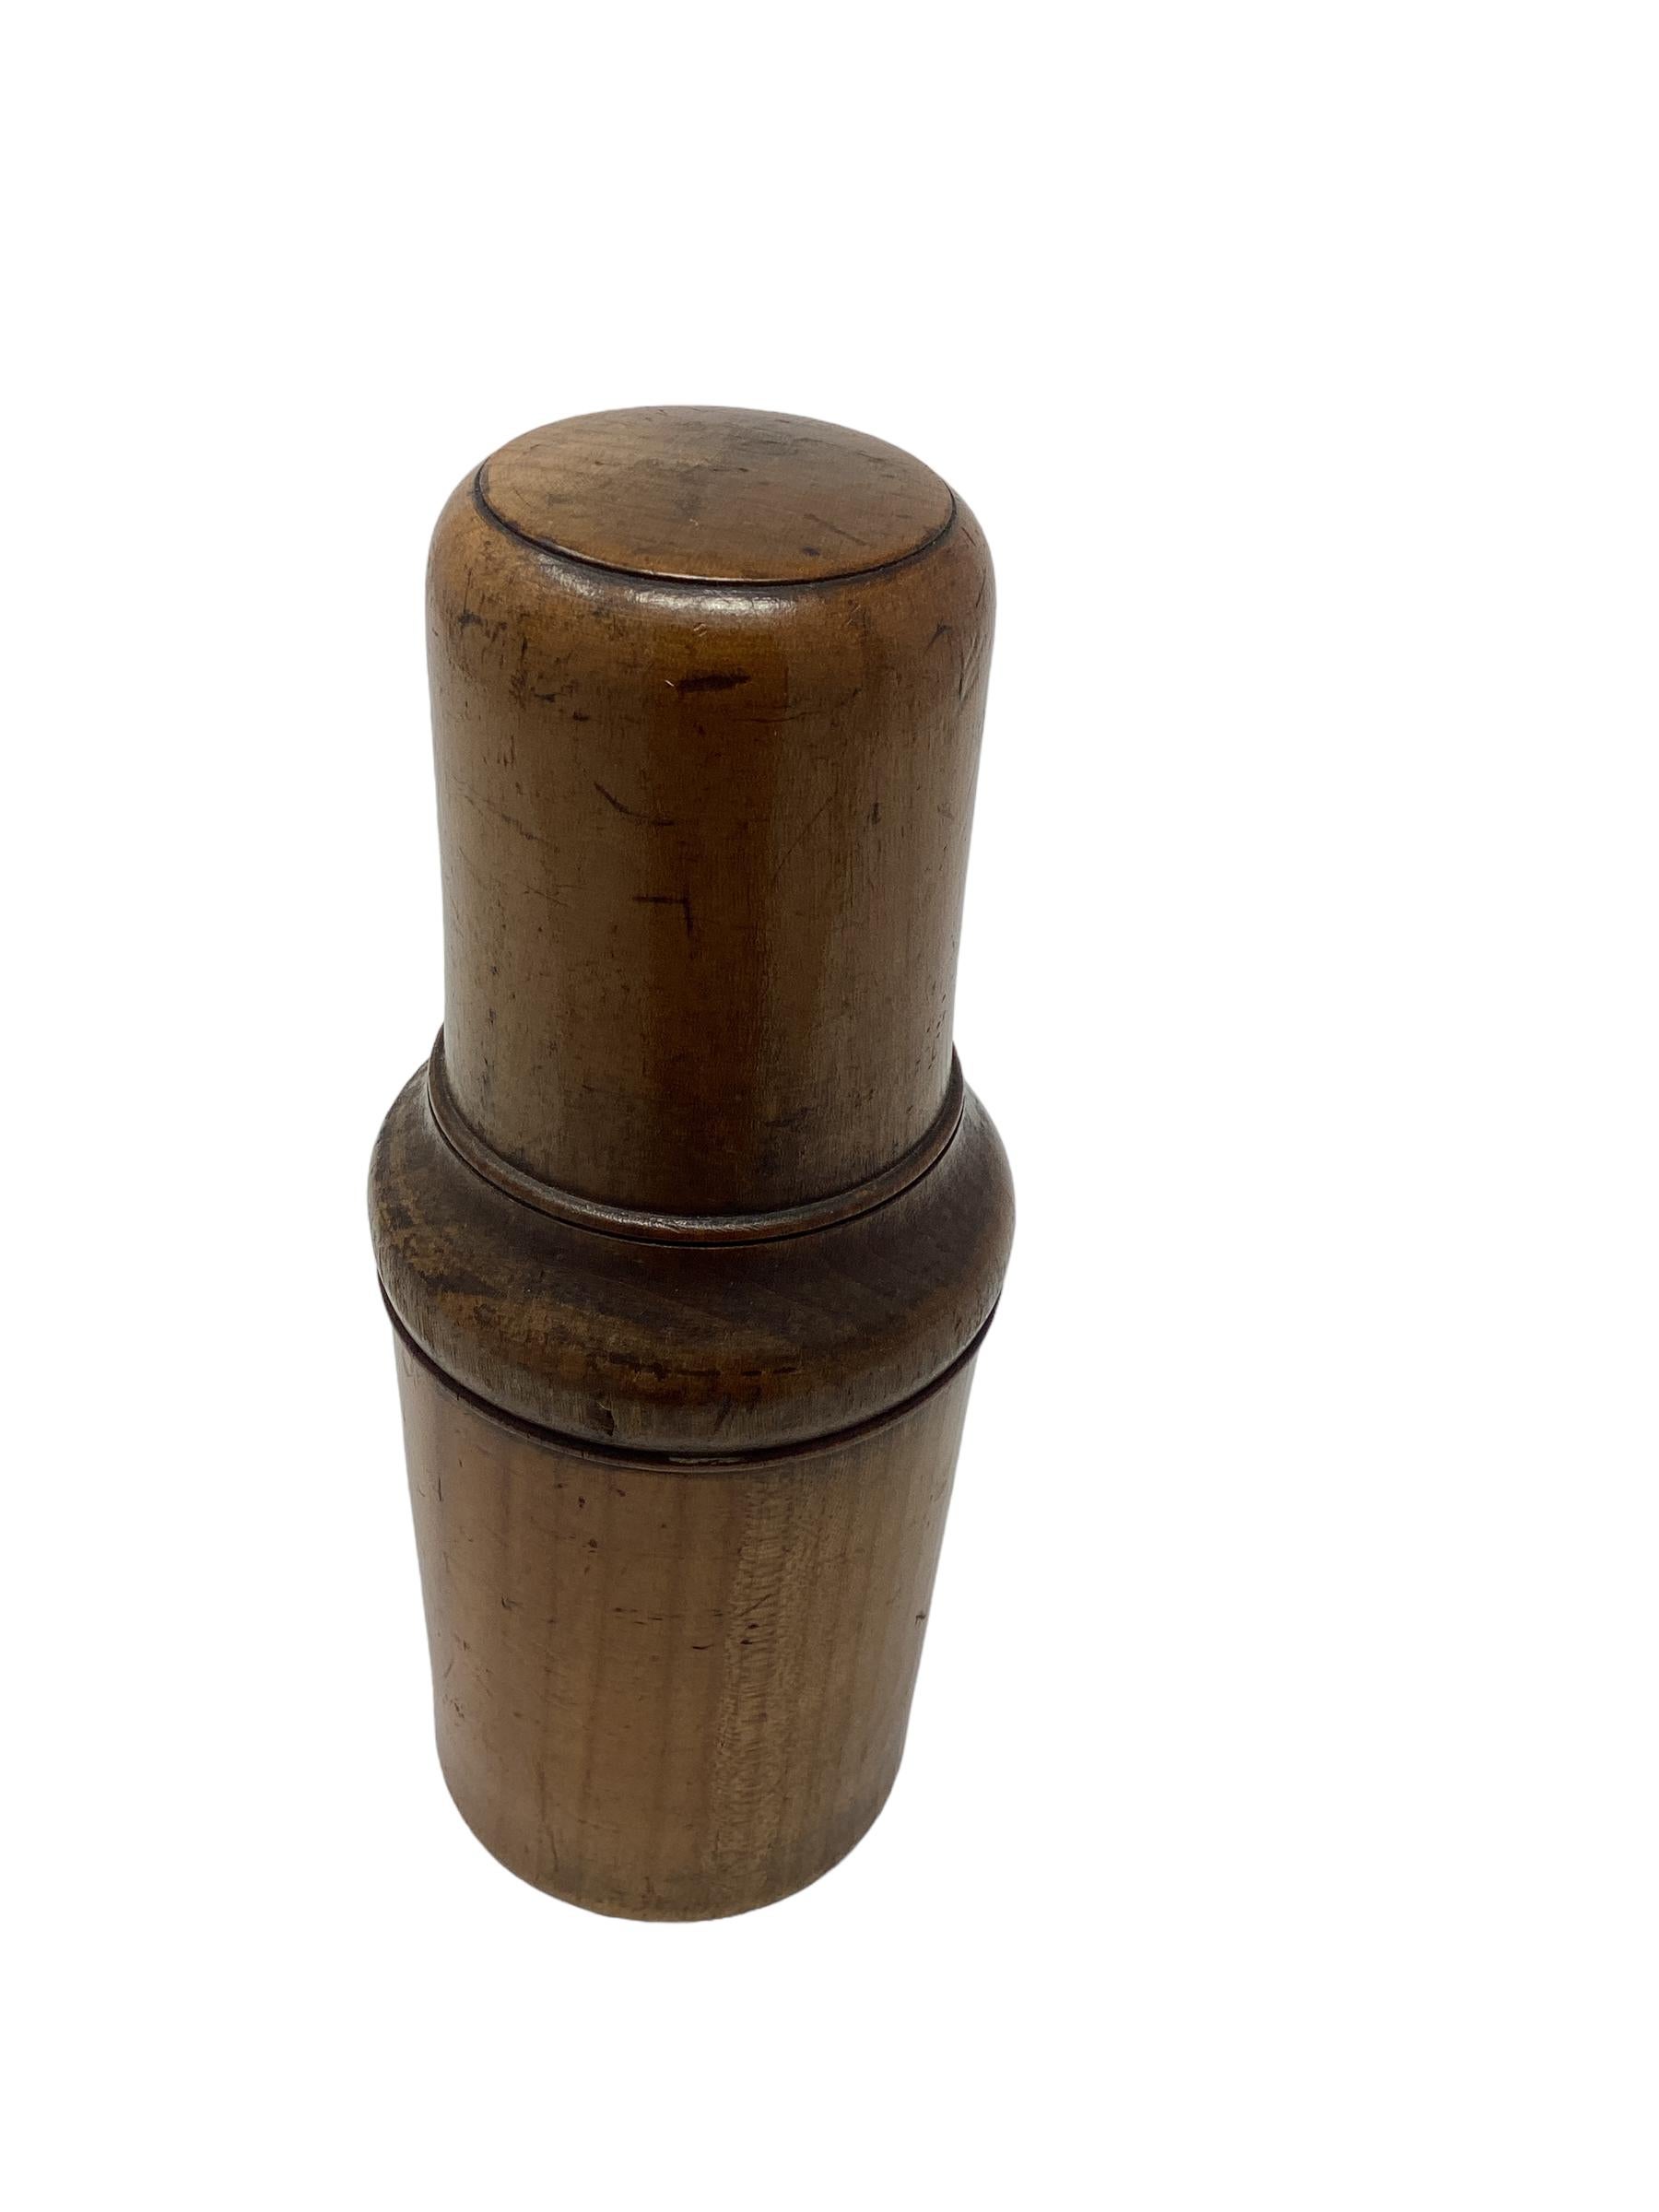 Antique English Treenware Flask or Bottle with Shot Glass. The top unscrews to reveal a glass flask and shot glass. The primary purpose of these antique treenware flasks or bottles with shot glasses was to provide a portable and convenient way to